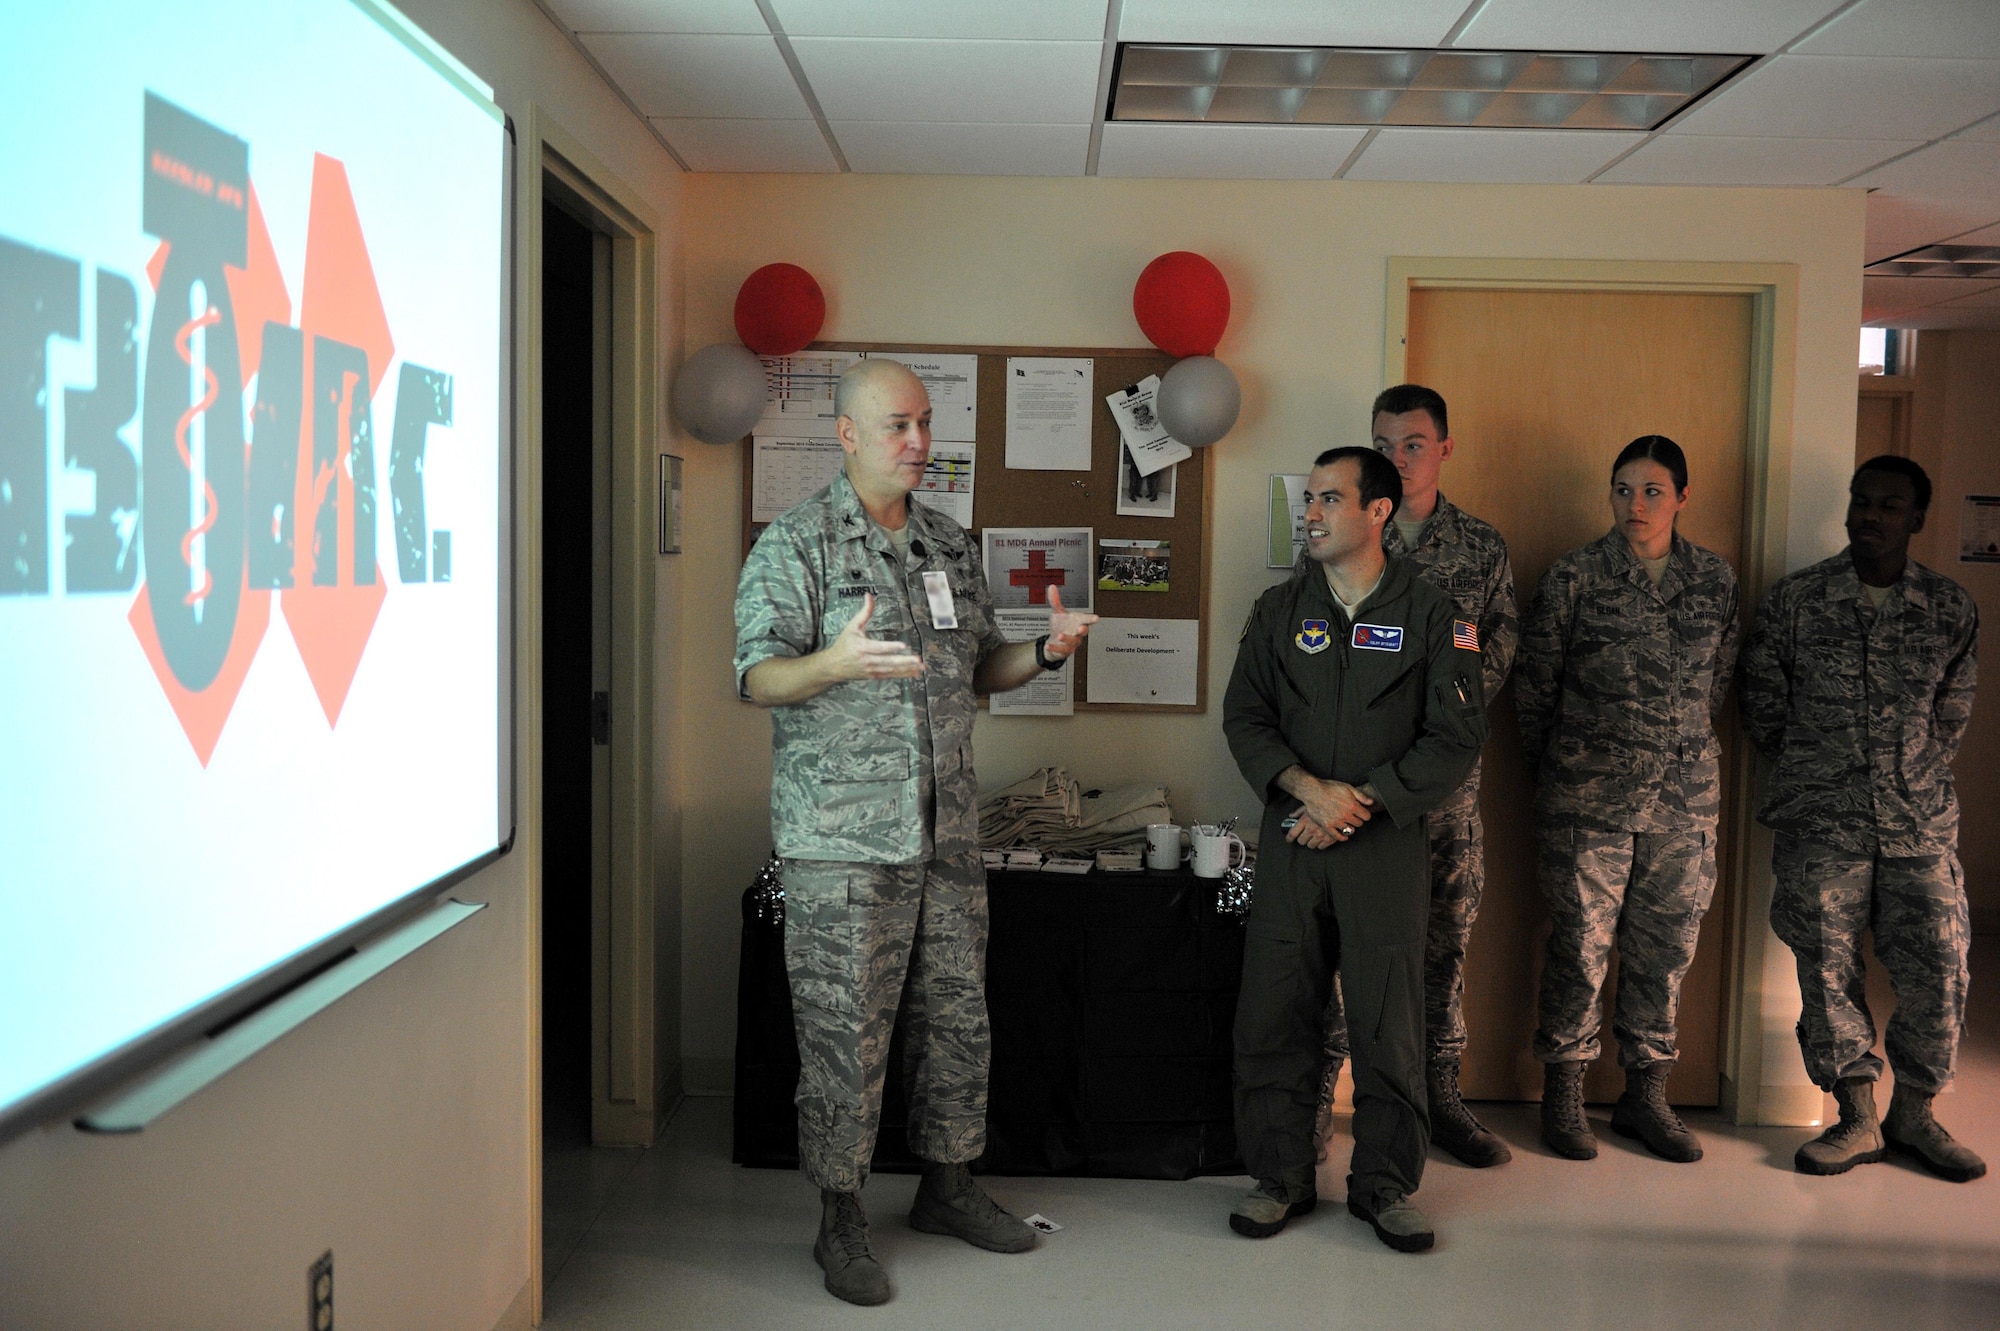 Col. (Dr.) Thomas Harrell, 81st Medical Group commander, gives remarks during the Base Operation Medicine Cell grand opening at the Keesler Medical Center, Sept. 28, 2015, Keesler Air Force Base, Miss. The Keesler BOMC is working to standardize Air Force healthcare by standardizing Public Health Assessments, Deployment Health Assessments, flight physicals and clearance physicals in order to make direct patient care more accessible, personal and timely. This clinic is the first of its kind in the Air Force. (U.S. Air Force photo by Airman 1st Class Duncan McElroy)